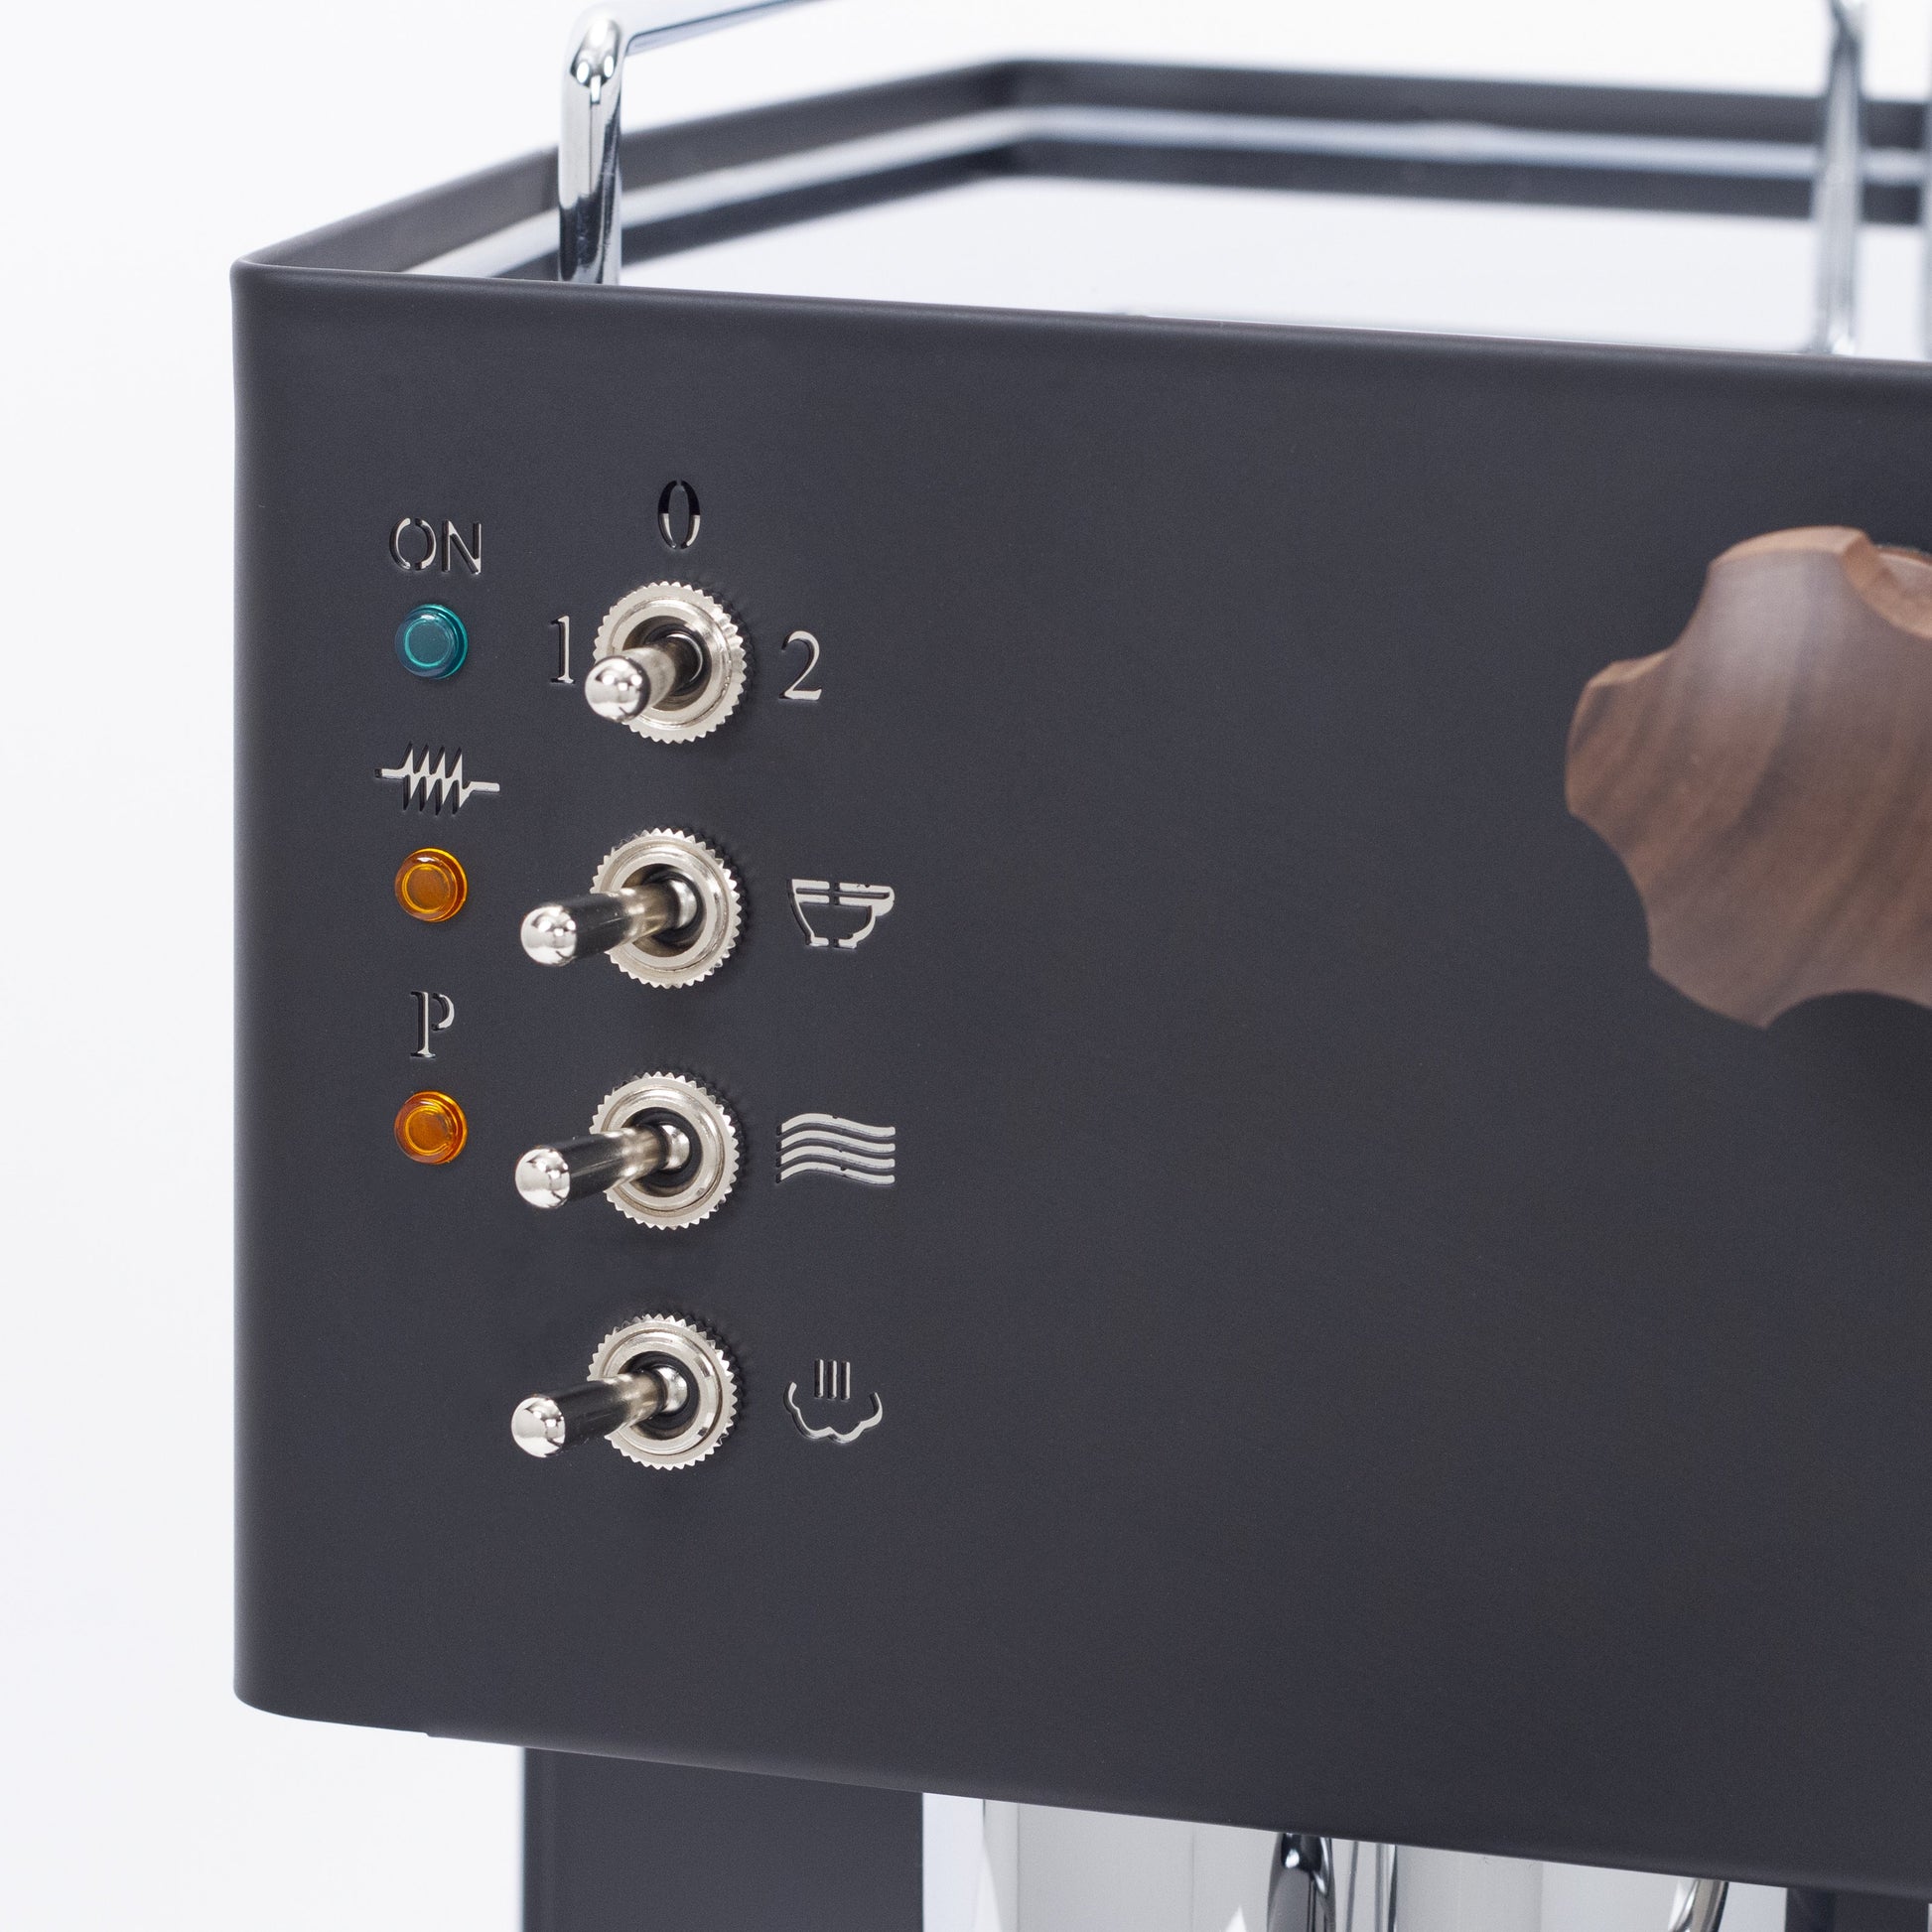 Quick Mill Pippa in black, custom wood steam knob and switches.